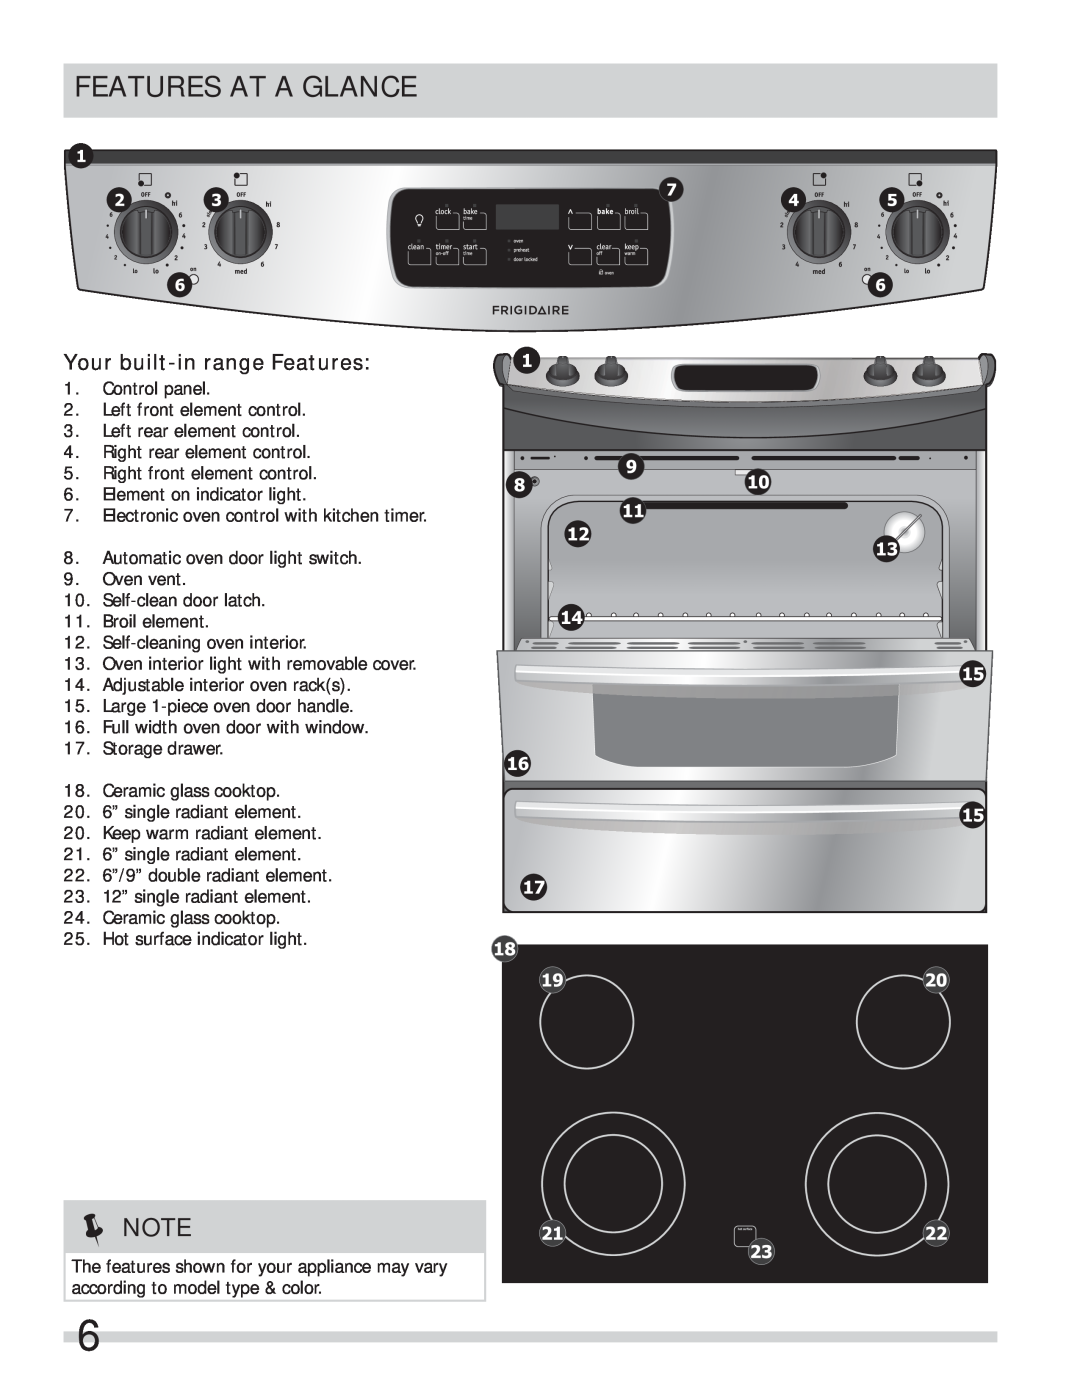 Frigidaire FFES3027LS important safety instructions Features At A Glance, Your built-inrange Features 